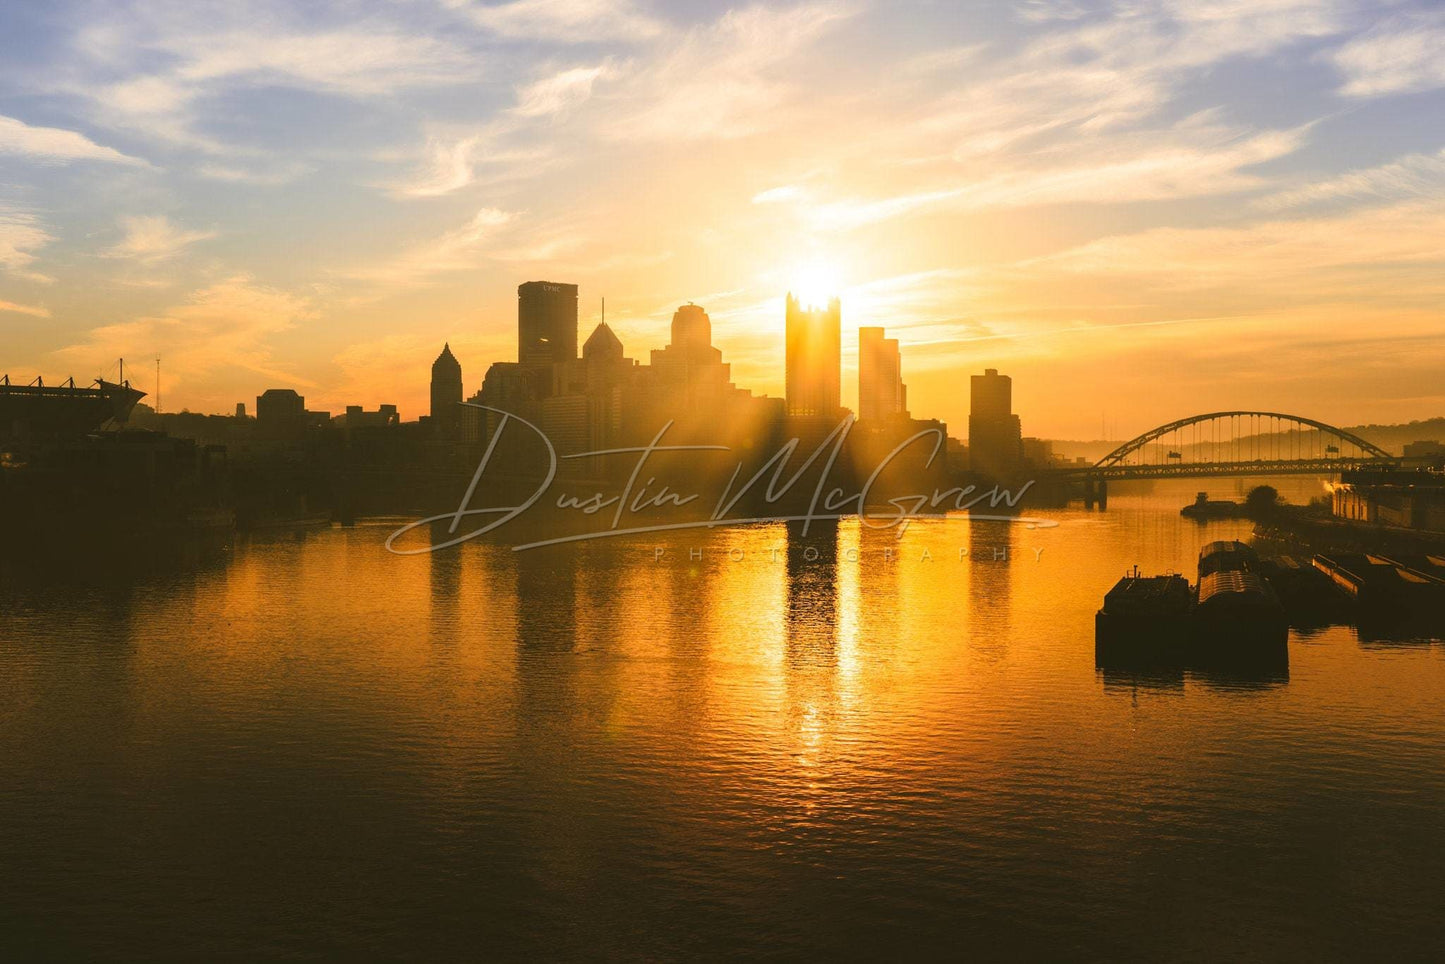 Pittsburgh Photo Print - Sunrise Over Ppg Place Wall Art Metal Canvas